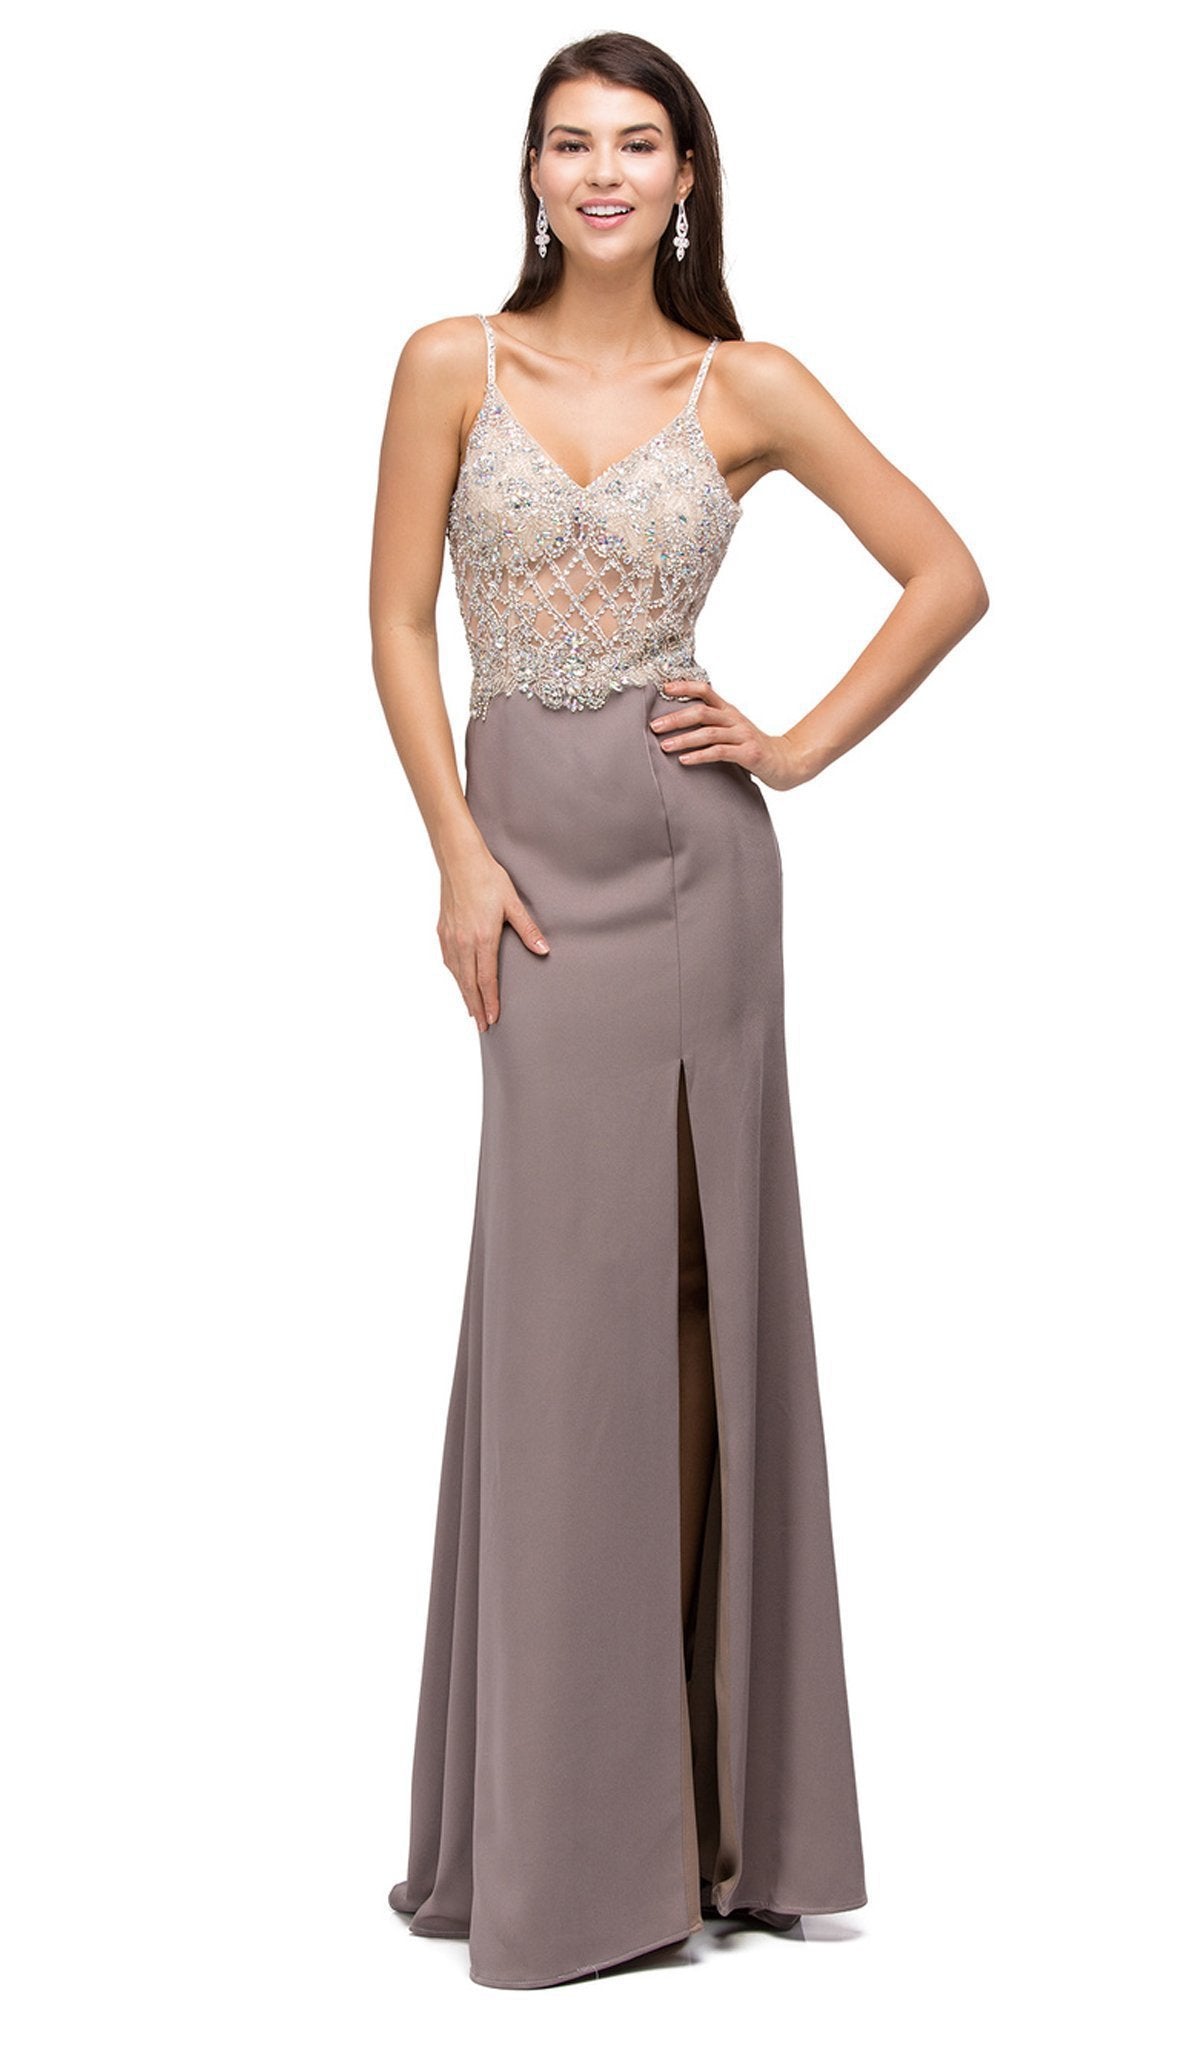 Dancing Queen - 9650 Sheer Jewel Embellished Bodice Evening Dress Special Occasion Dress XS / Mocha